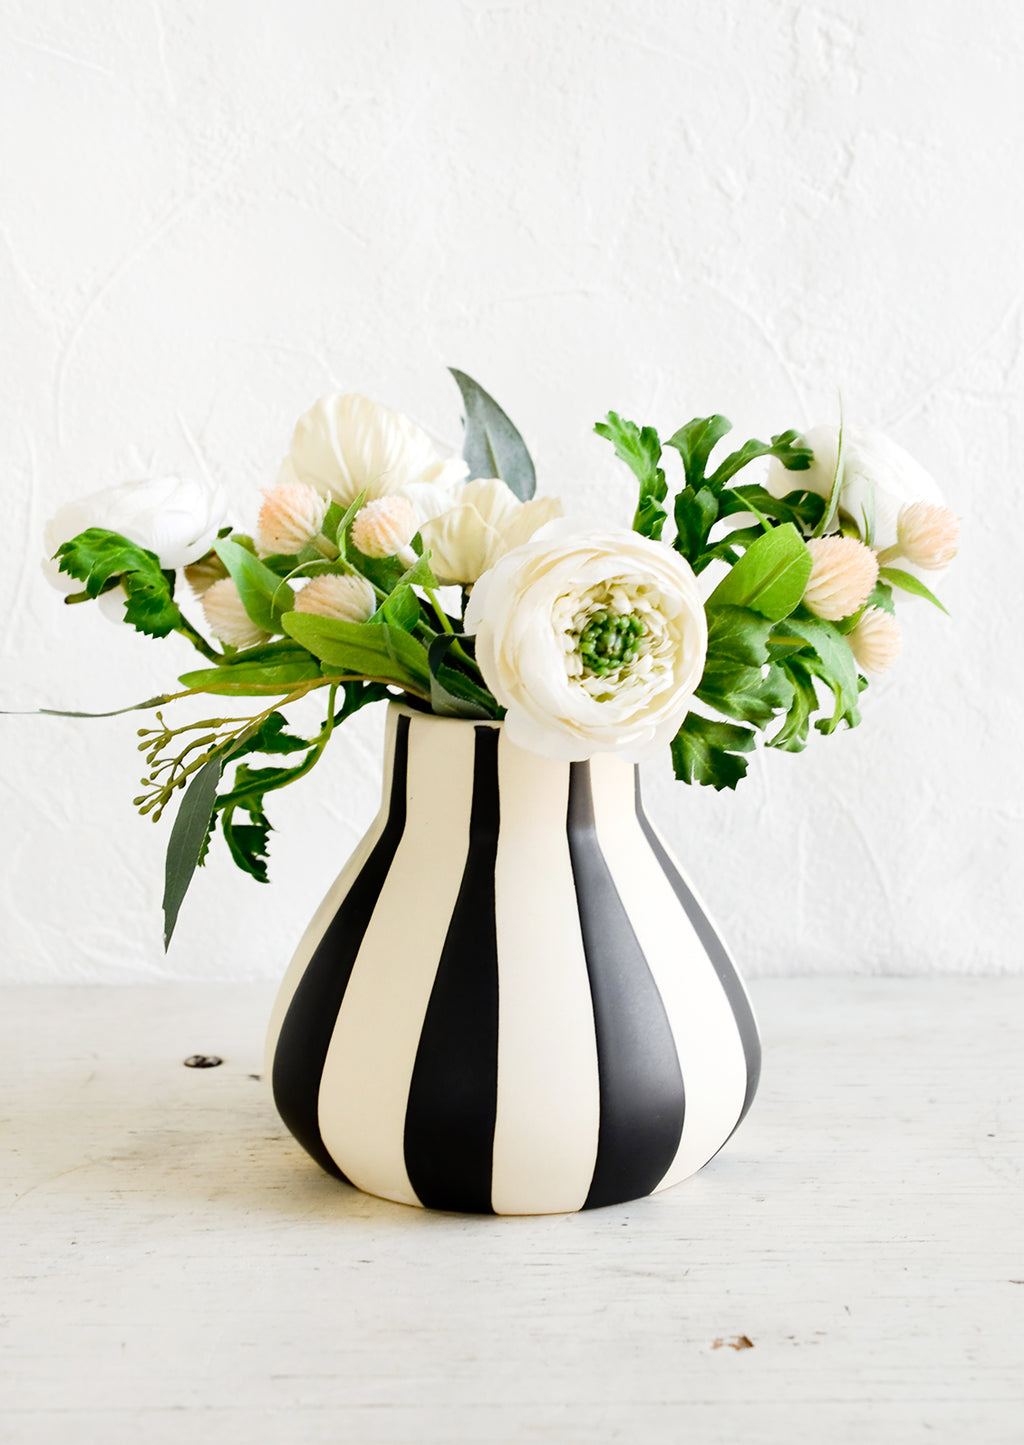 Wide Stripes: A flower arrangement in a white ceramic vase with thick black stripes.